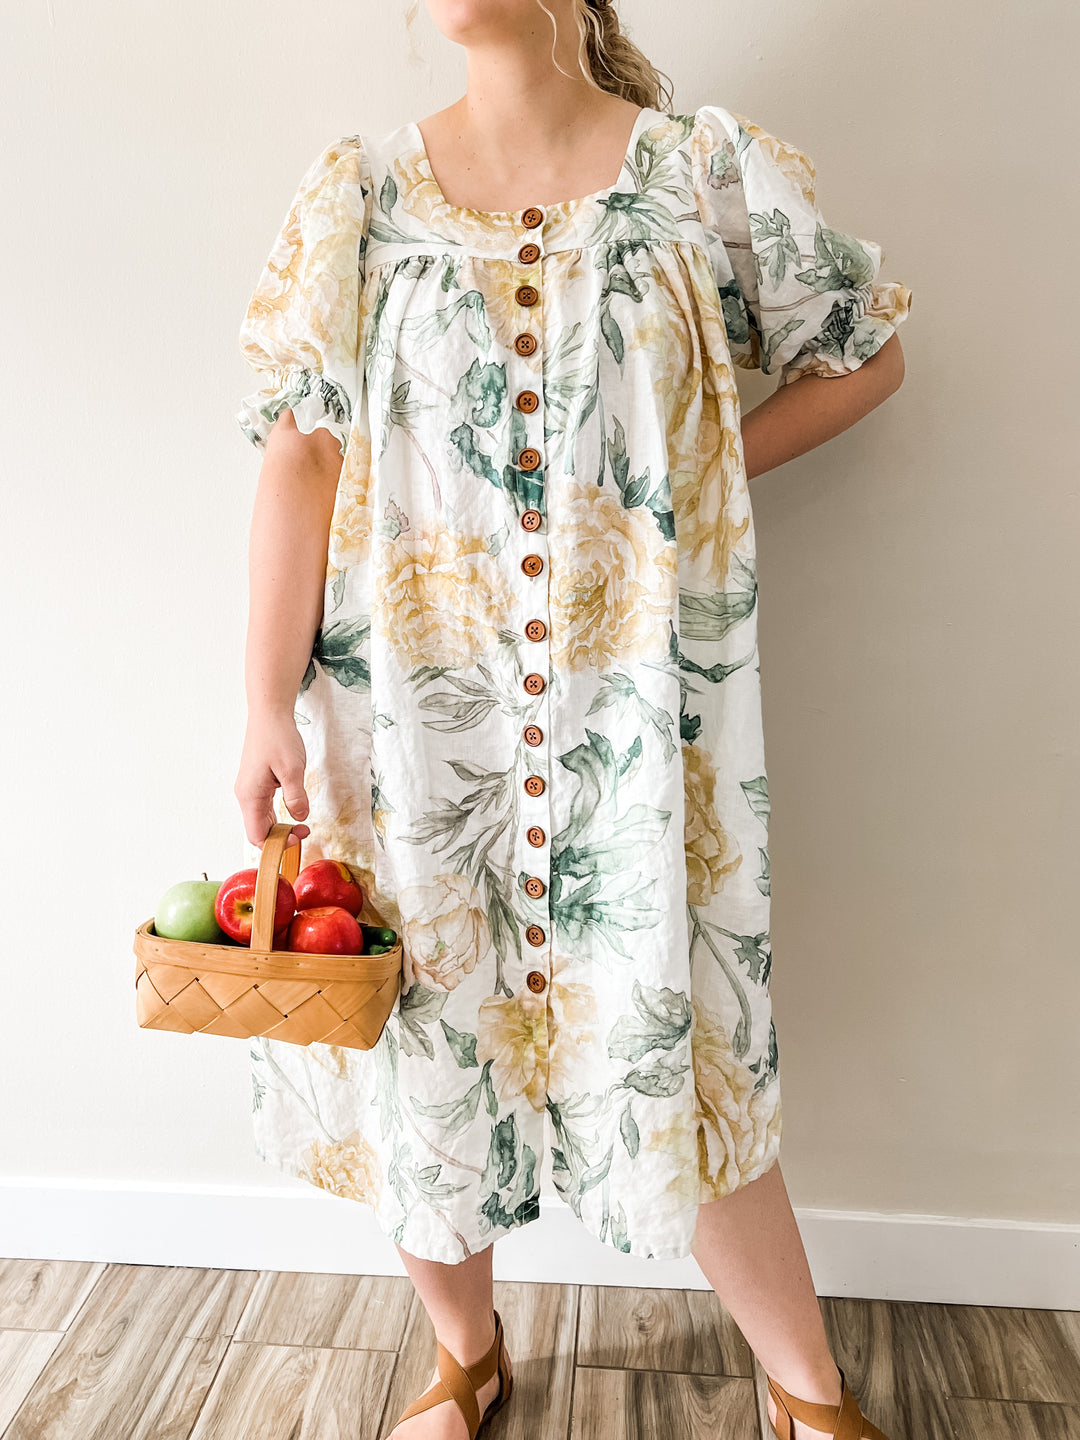 The Orchard Dress